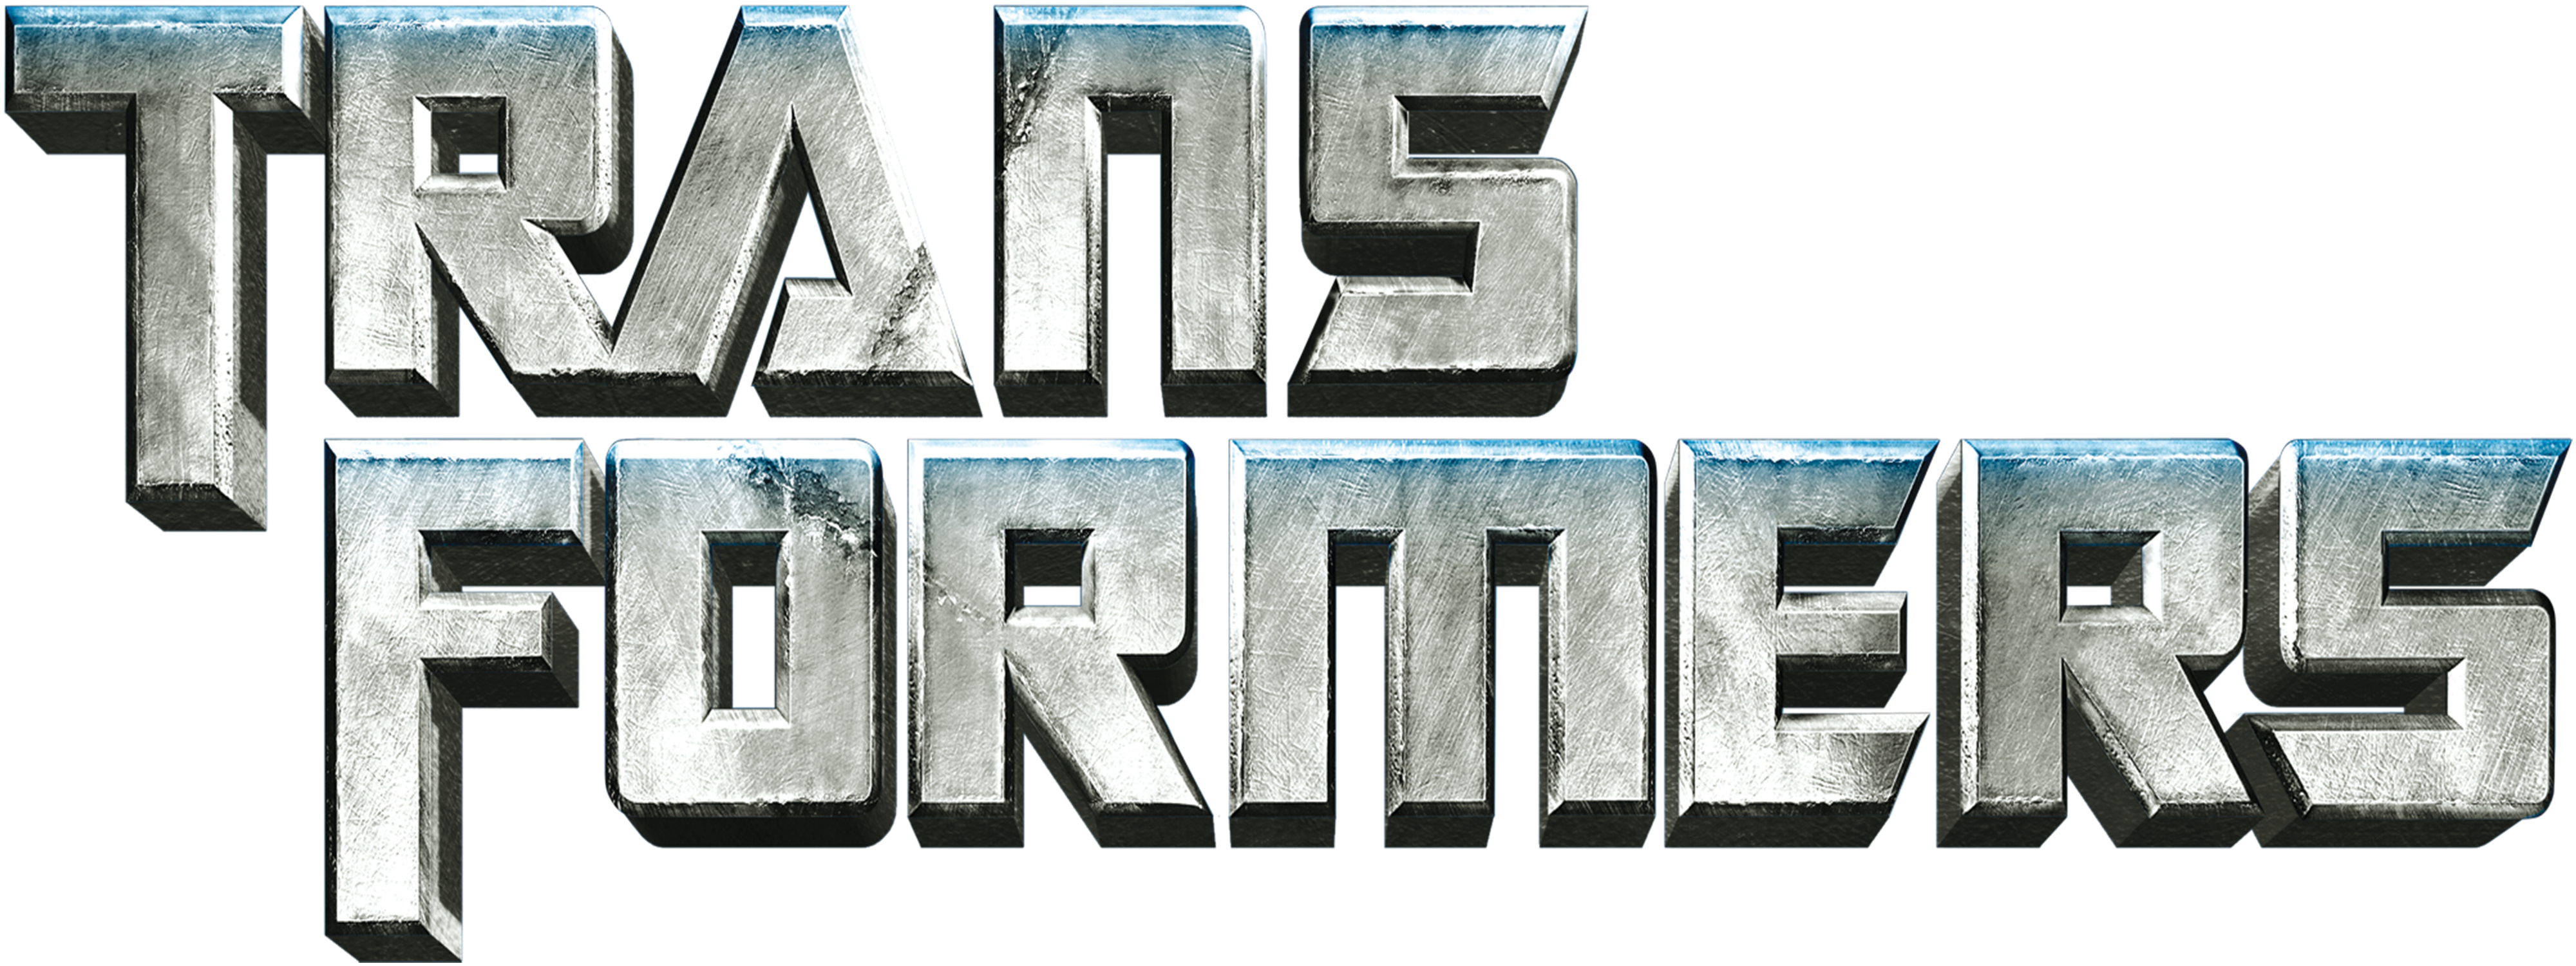 Download Transformers Logo Png Images Transparent Gallery. Advertisement - Transformers, Transparent background PNG HD thumbnail